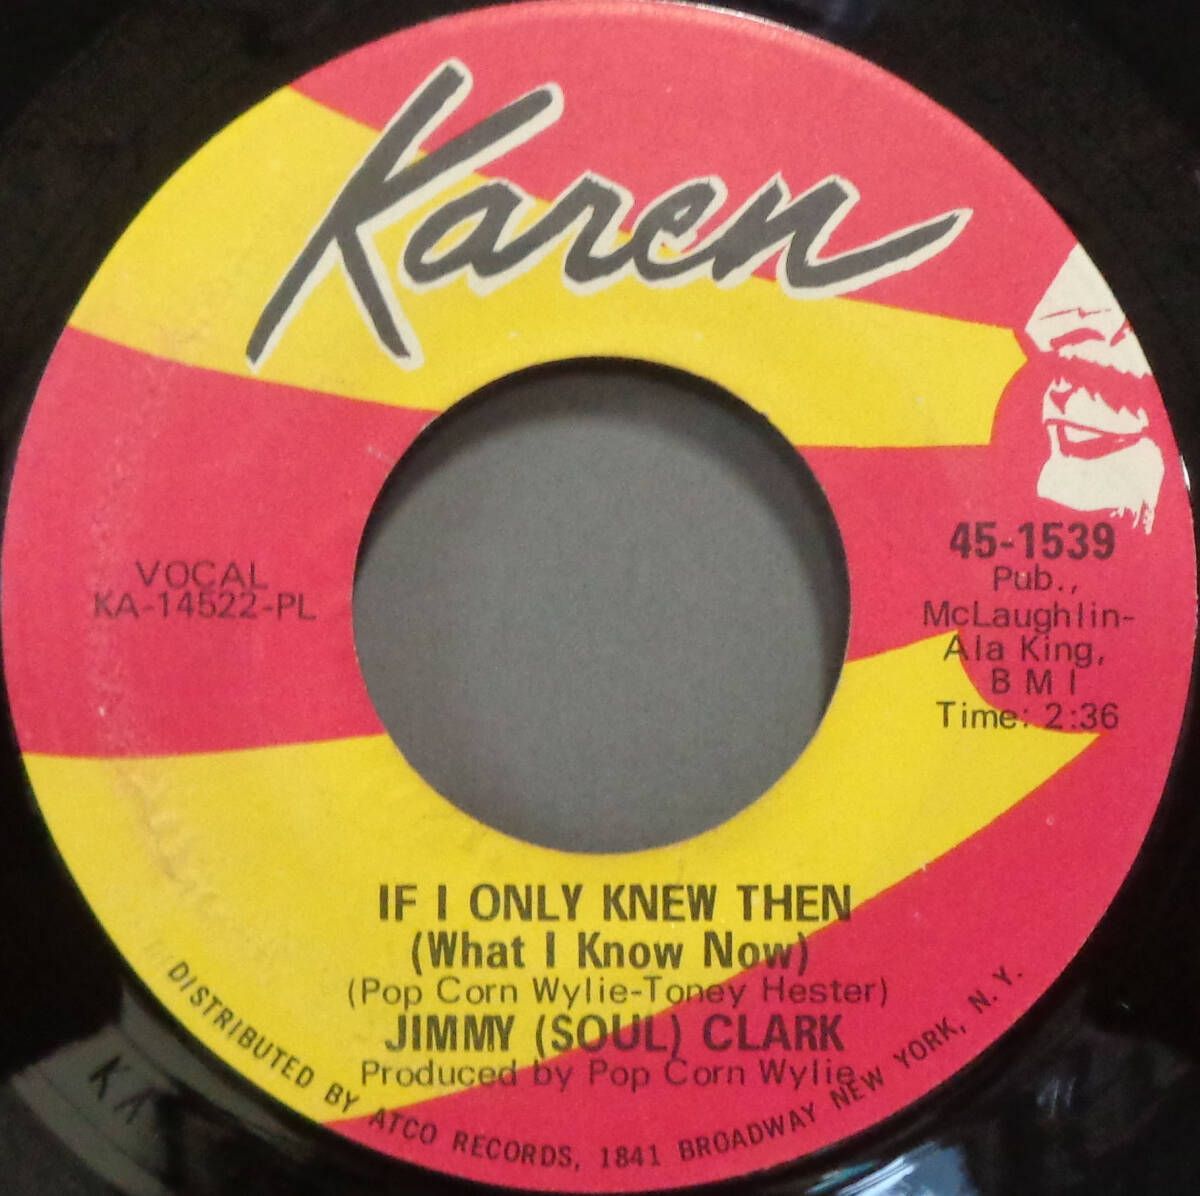 【SOUL 45】JIMMY (SOUL) CLARK - IF I ONLY KNEW THEN (WHAT I KNOW NOW) / DO IT RIGHT NOW (s240429030)_画像1